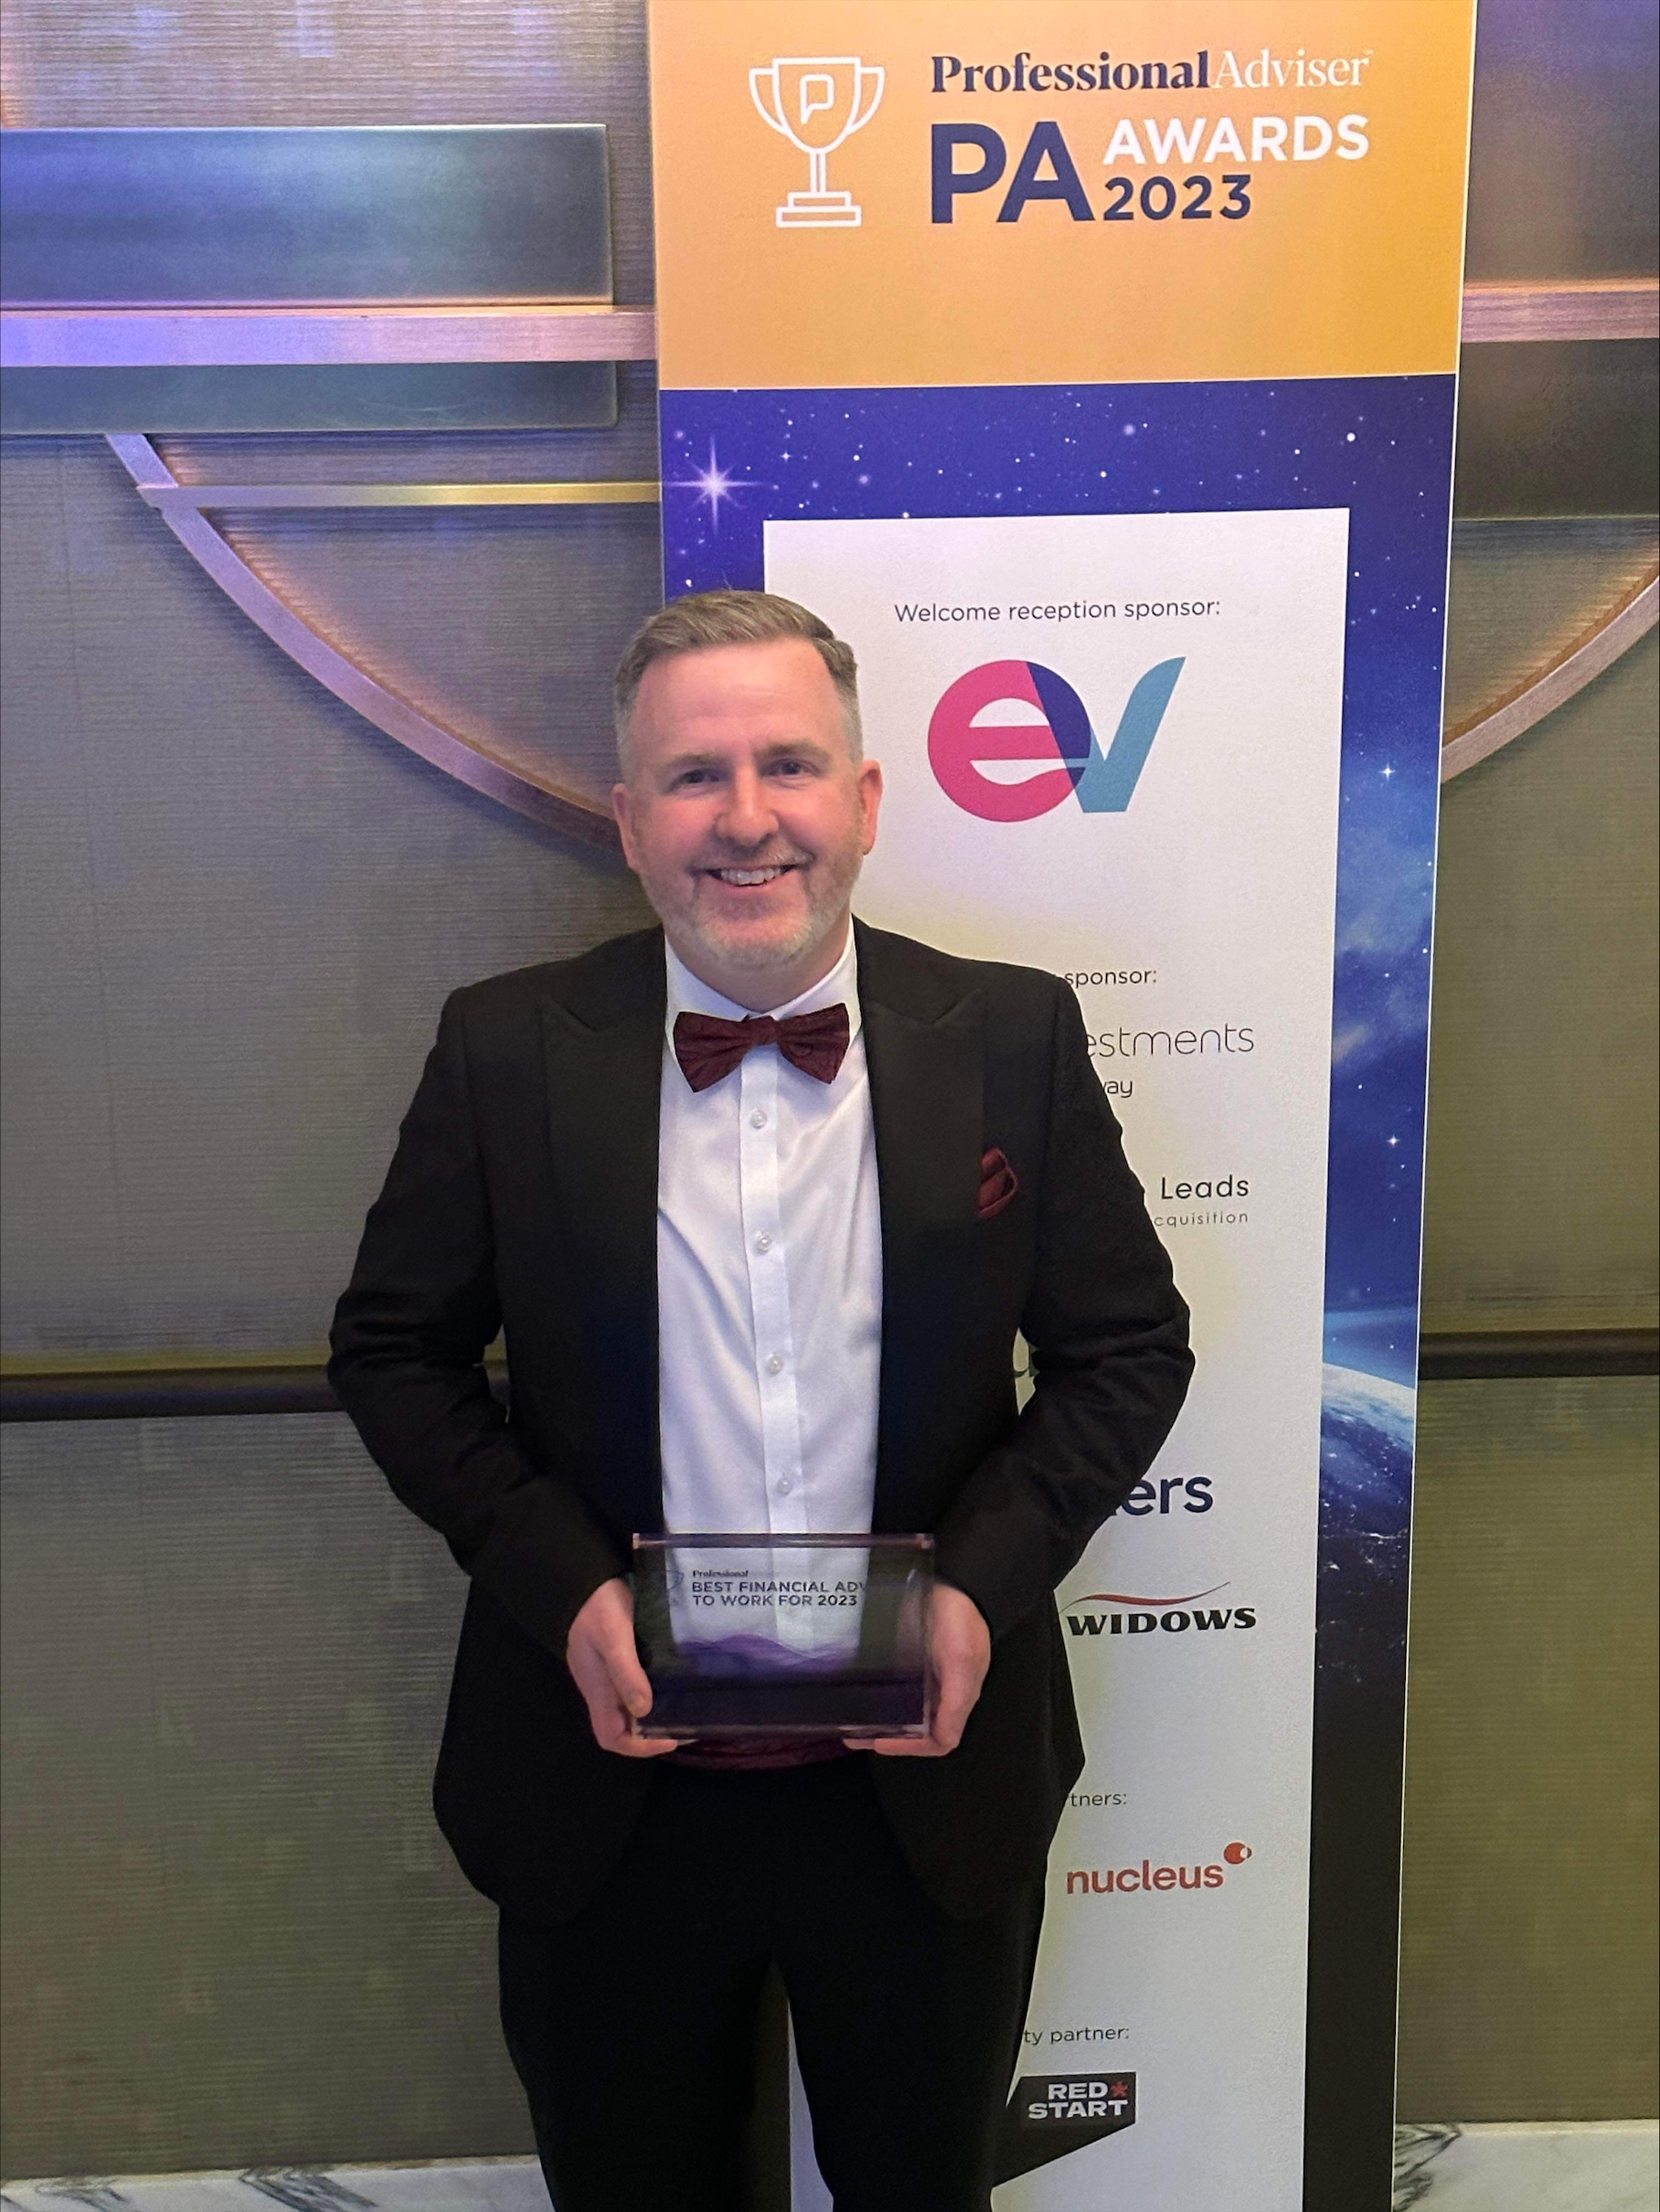 Awards success for Phil Anderson Financial Services